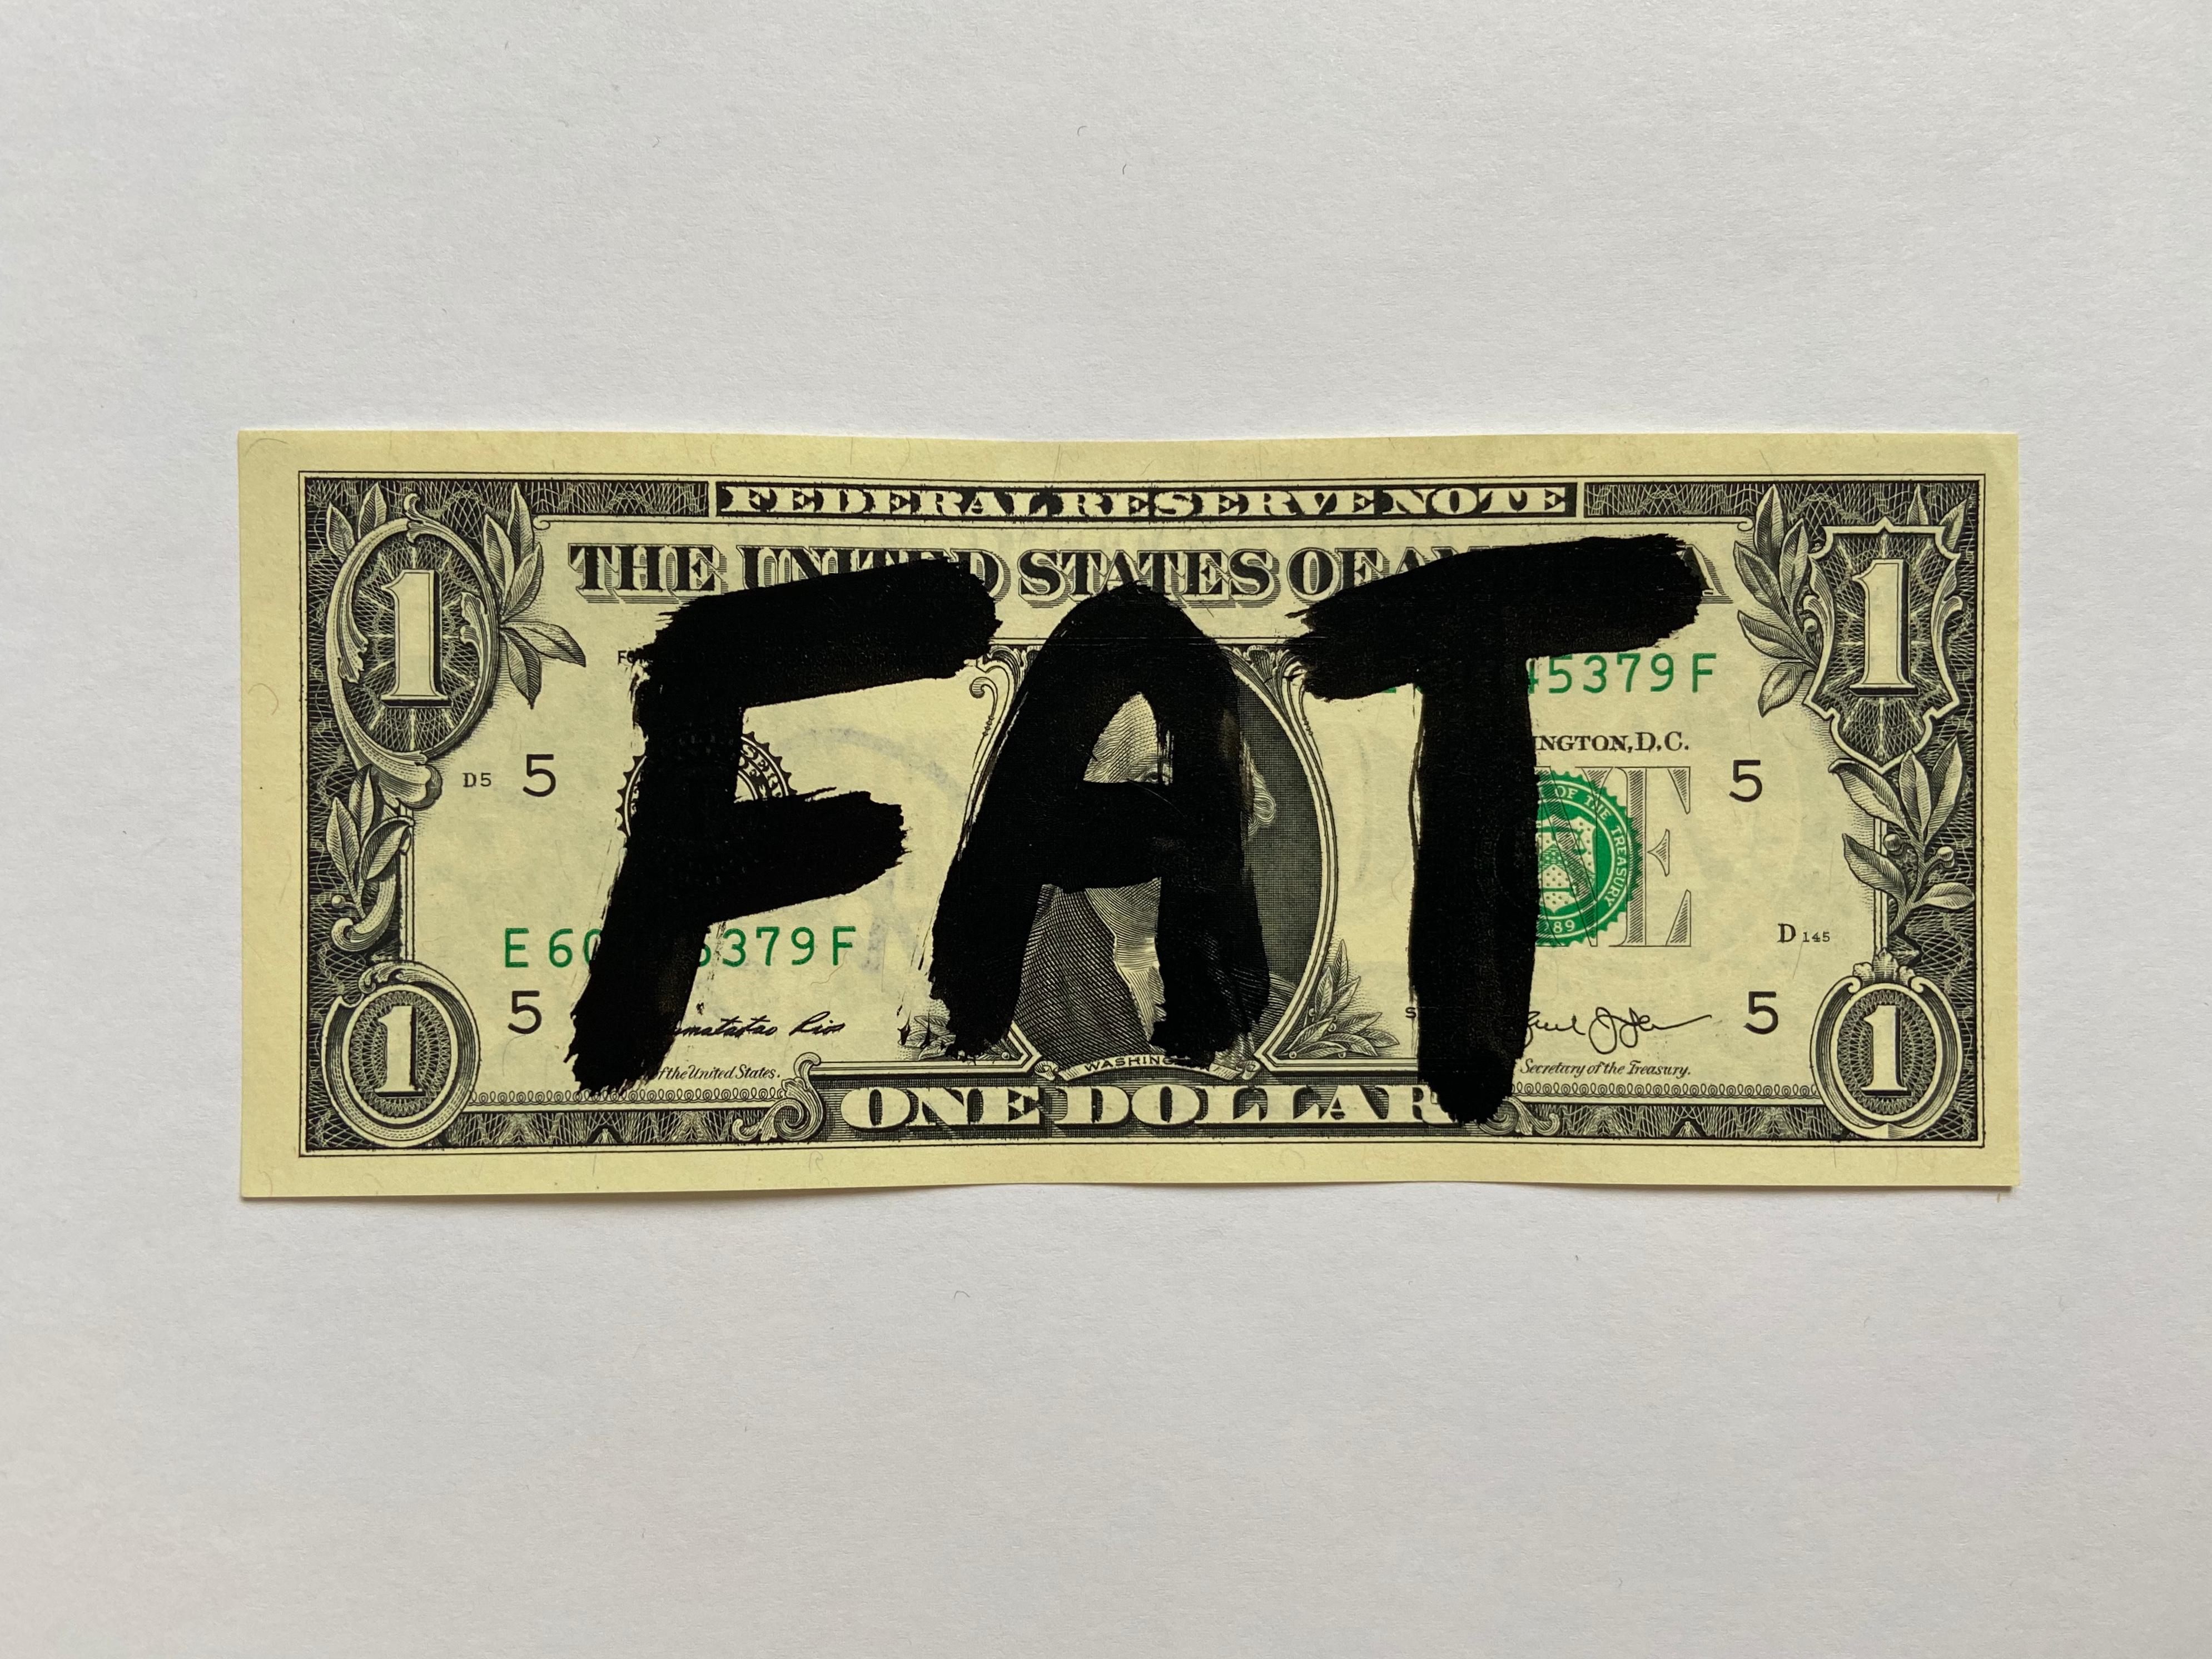 Death NYC
FAT
2017
Gluing on 1 dollar notes
Signed by the artist
Size: 7 x 15.5 cm
Original copy, delivered with certificate of authenticity and stamp of the artist
Perfect condition 
99 euros